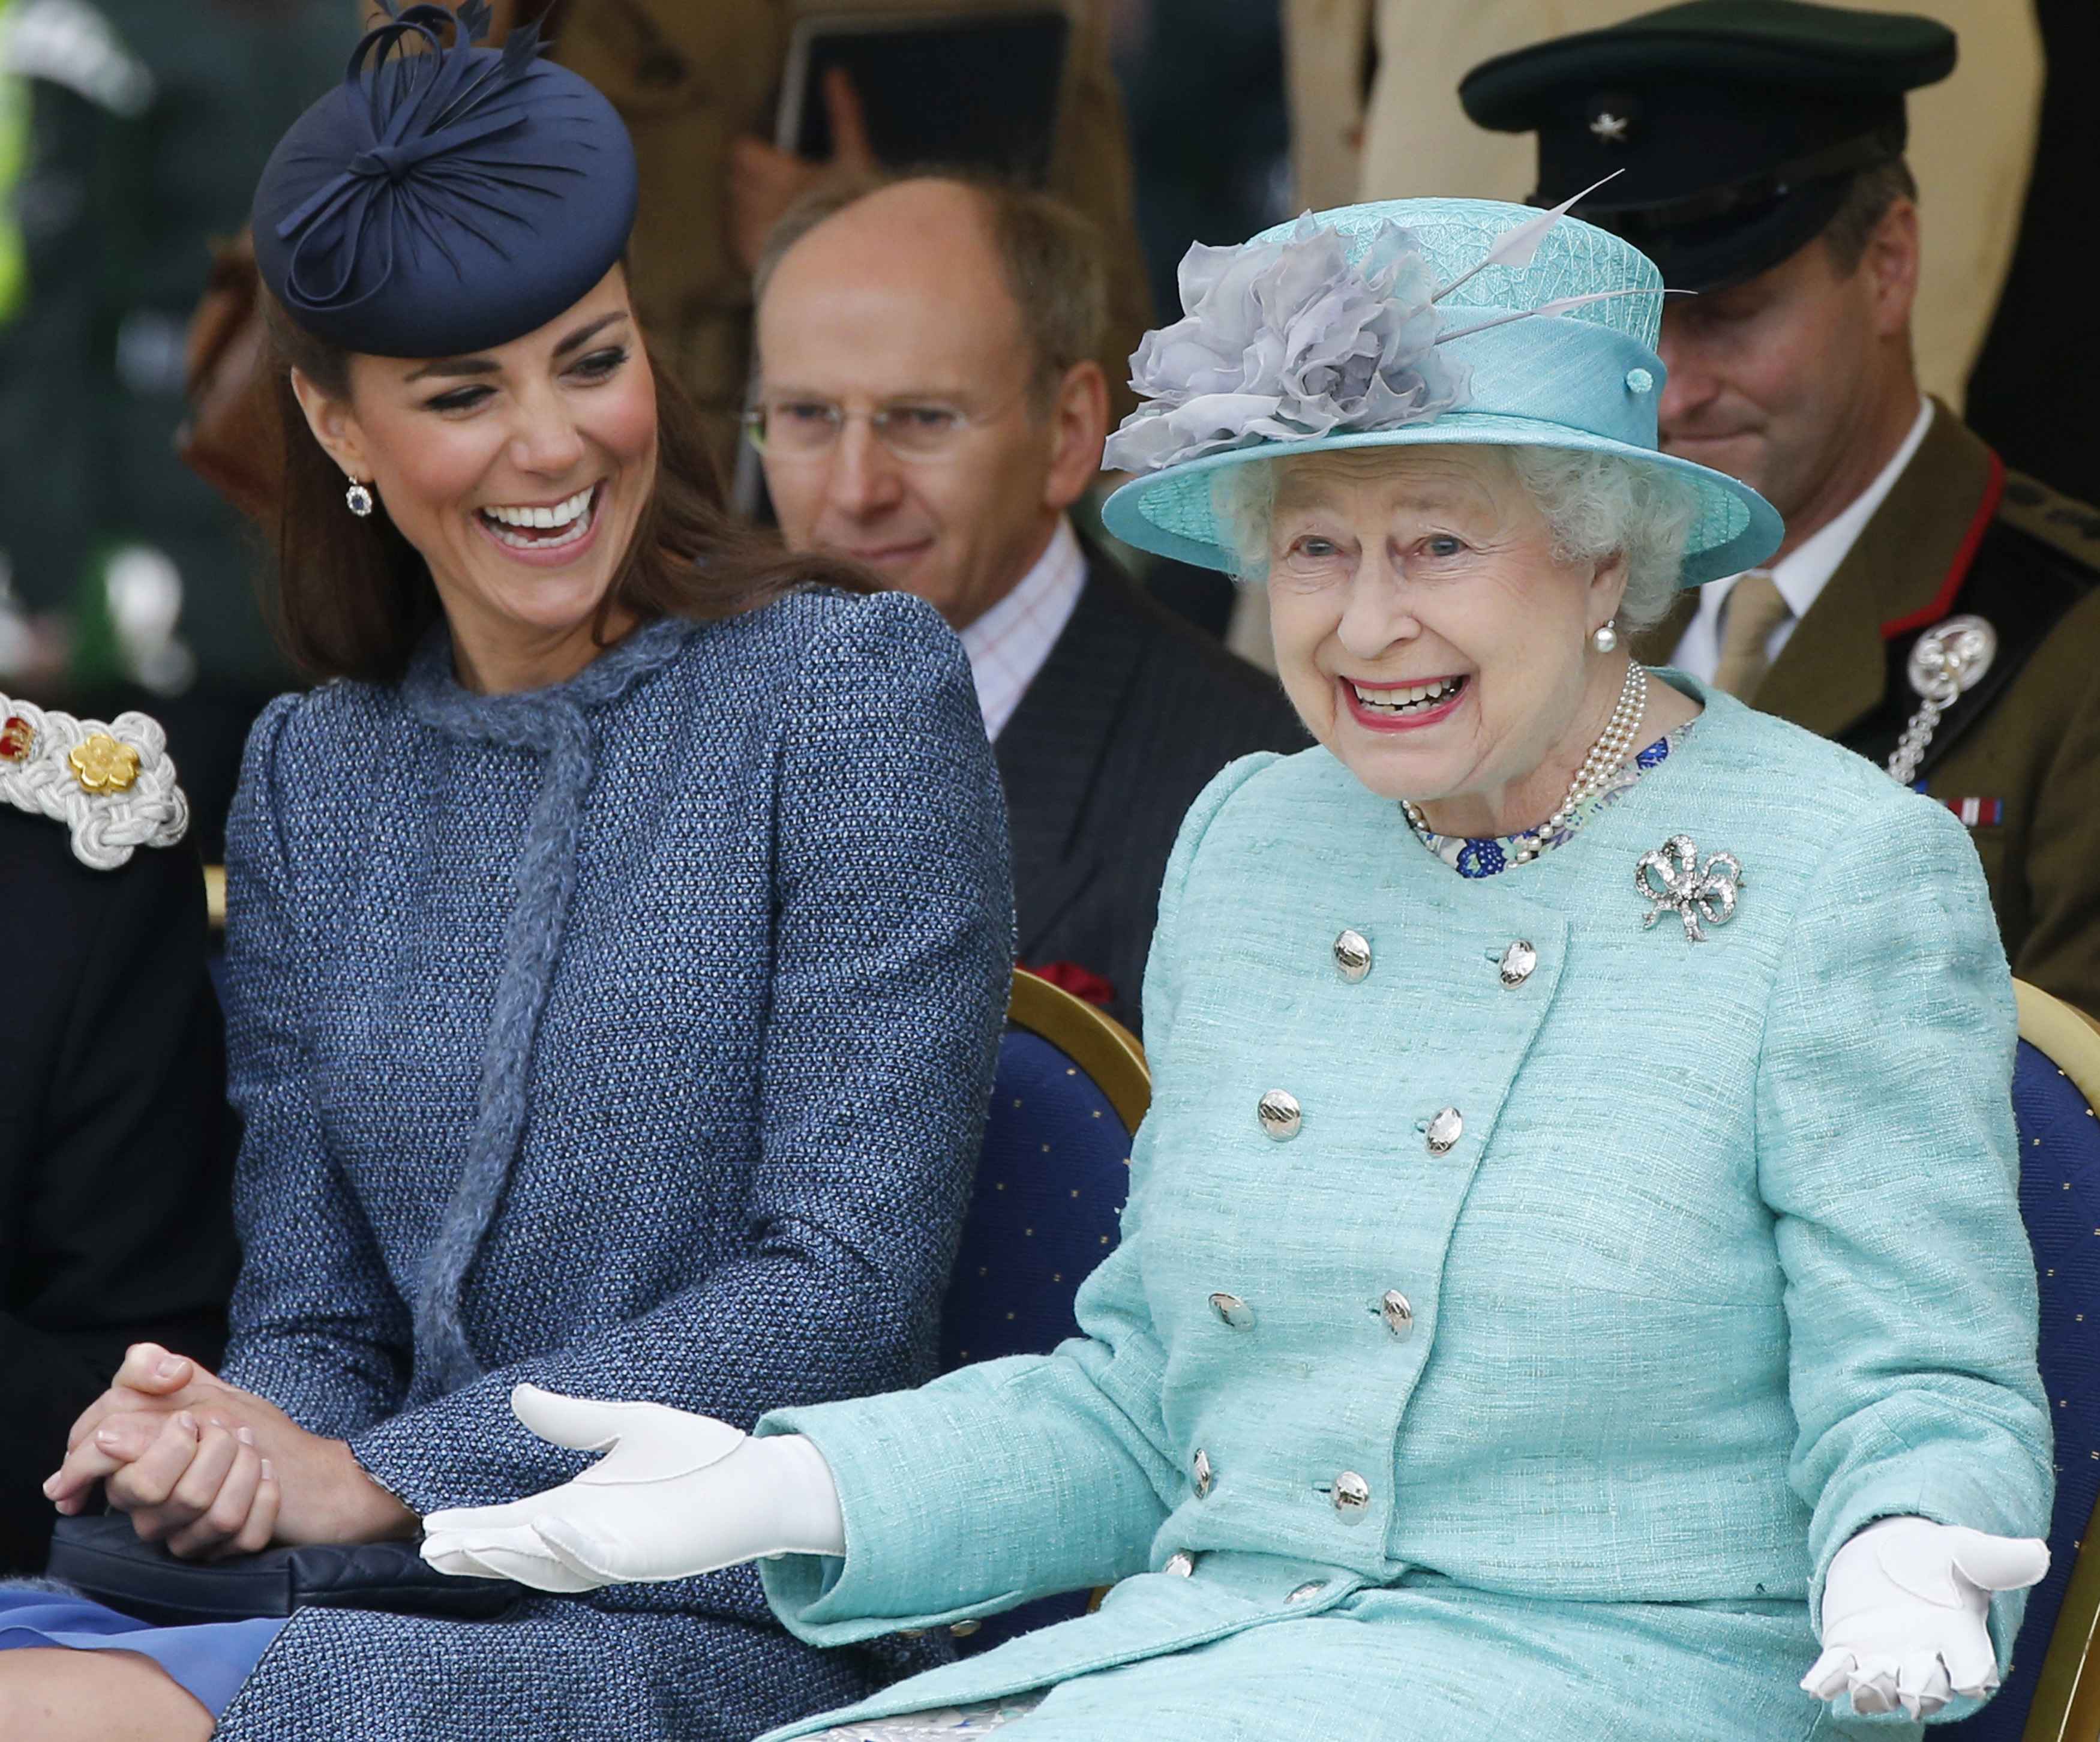 Catherine, Duchess of Cambridge and Queen Elizabeth II watch part of a children's sports event while visiting Vernon Park during a Diamond Jubilee visit to Nottingham on June 13, 2012 in Nottingham, England. | Source: Getty Images